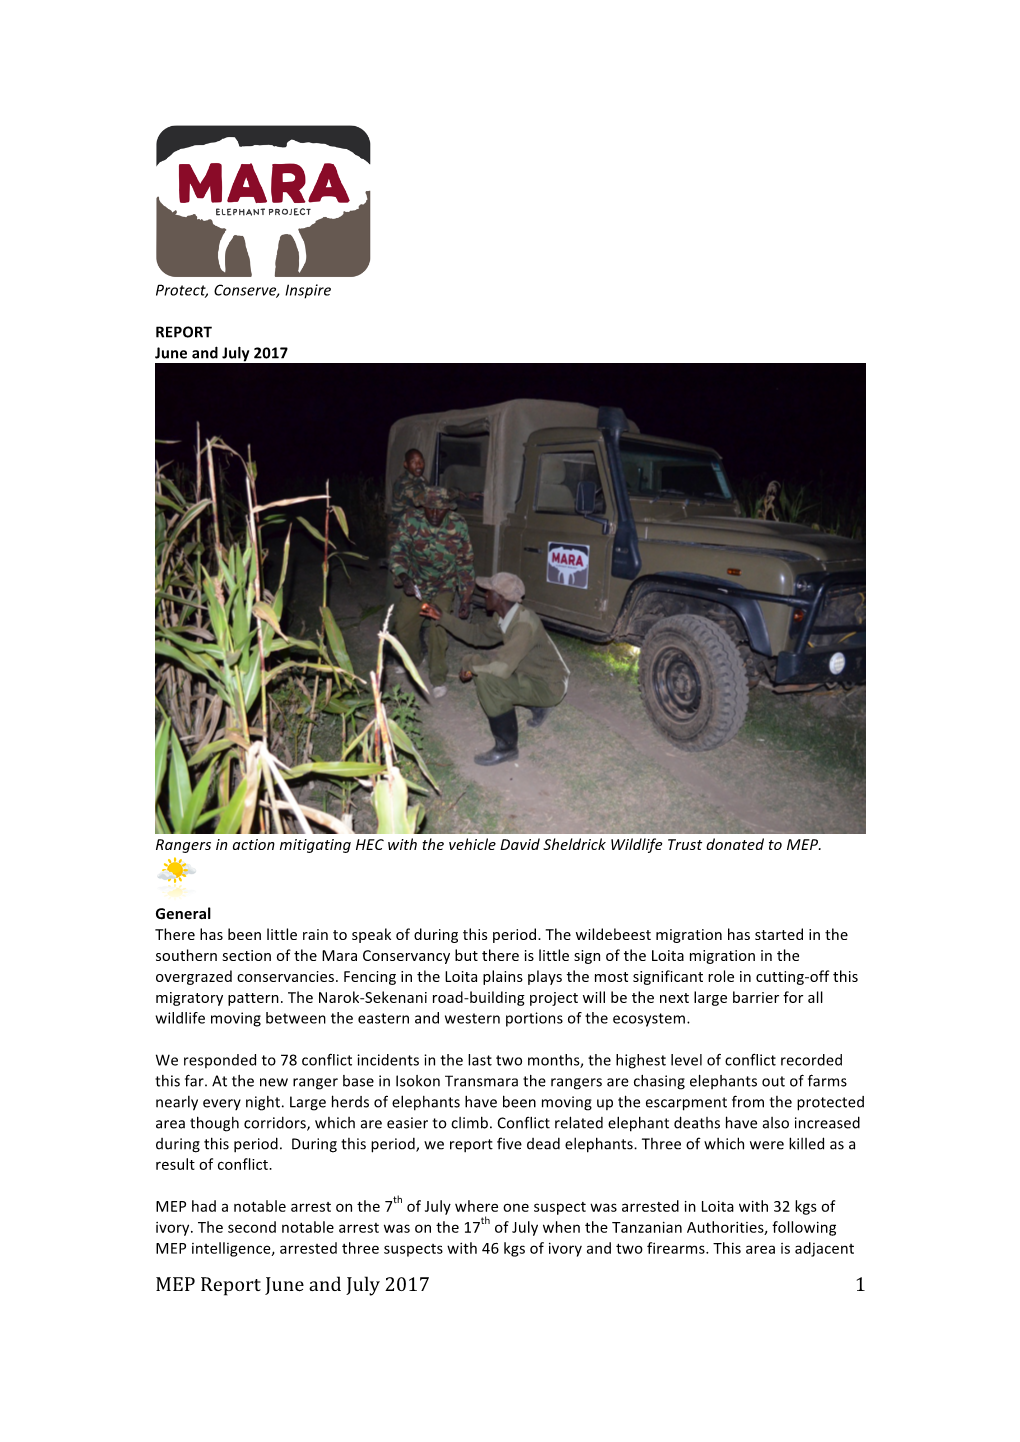 MEP Report June and July 2017 1 to the Loita Hills on the Tanzanian Side of the Border Reinforcing Our Concern for Elephant Security in the Area